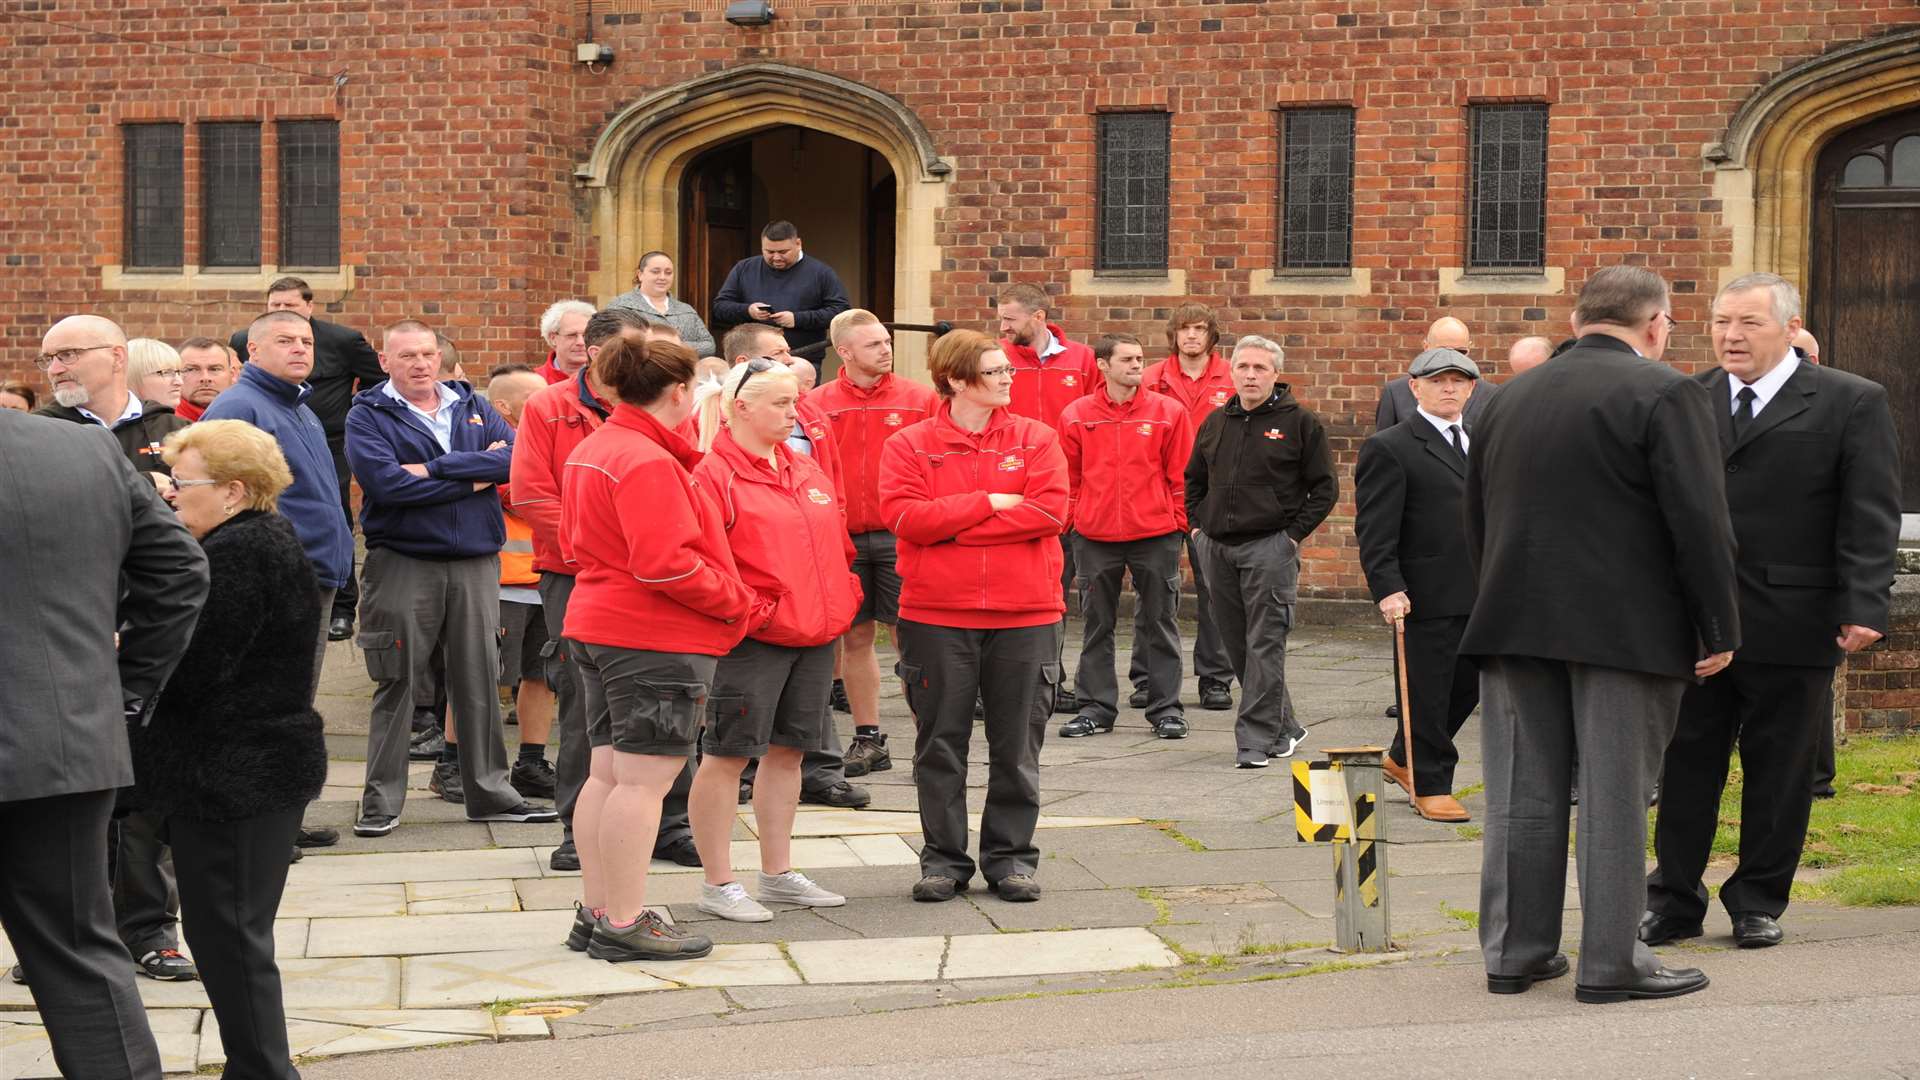 Colleagues from the Gillingham delivery office were among the mourners